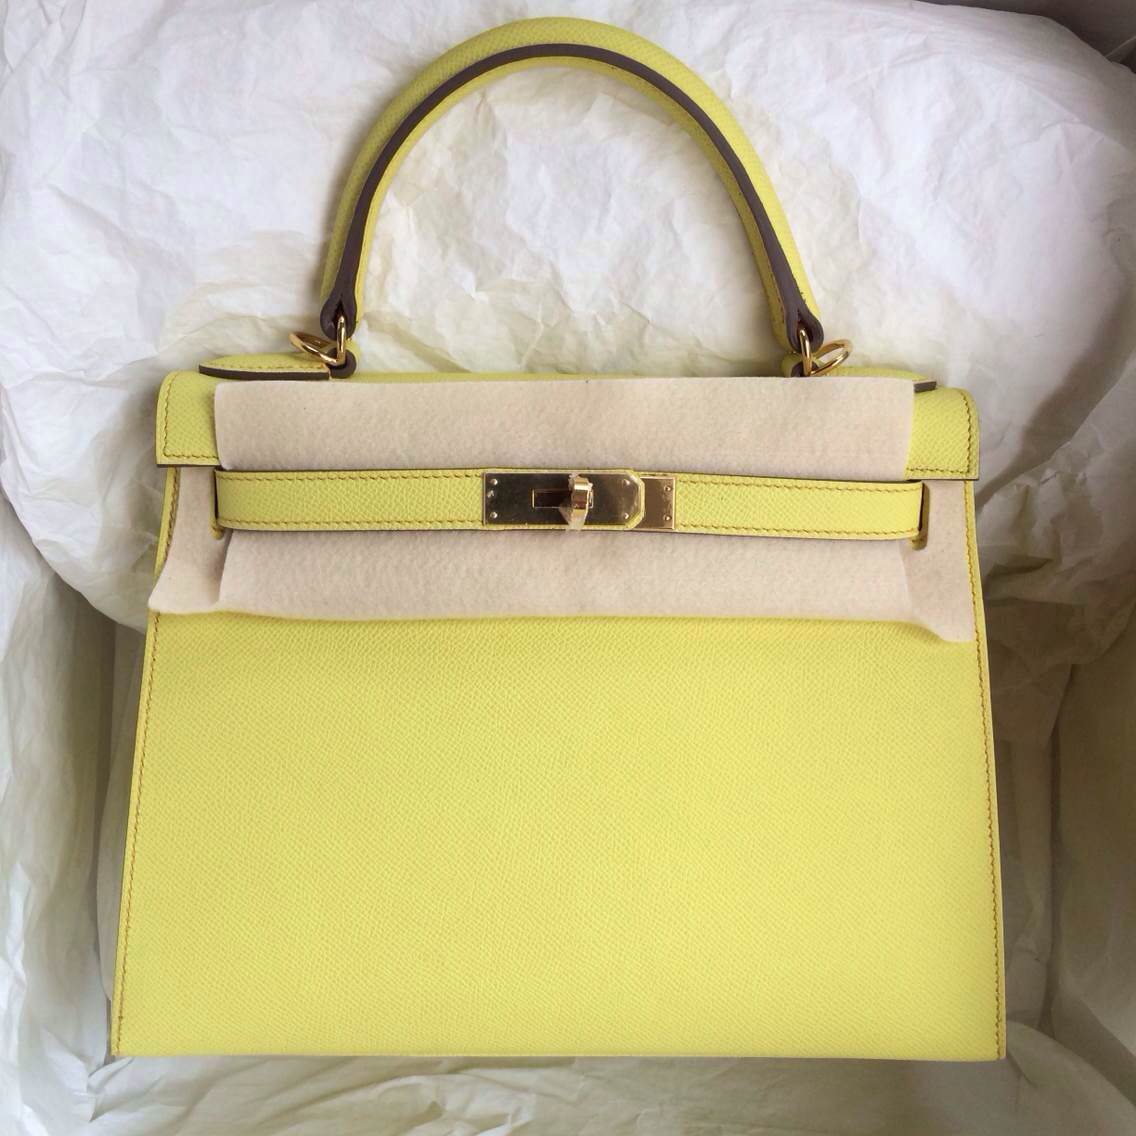 Hand Stitching Kelly Bag 28cm Sellier C9 Lime Yellow Epsom Leather Gold/Silver Hardware